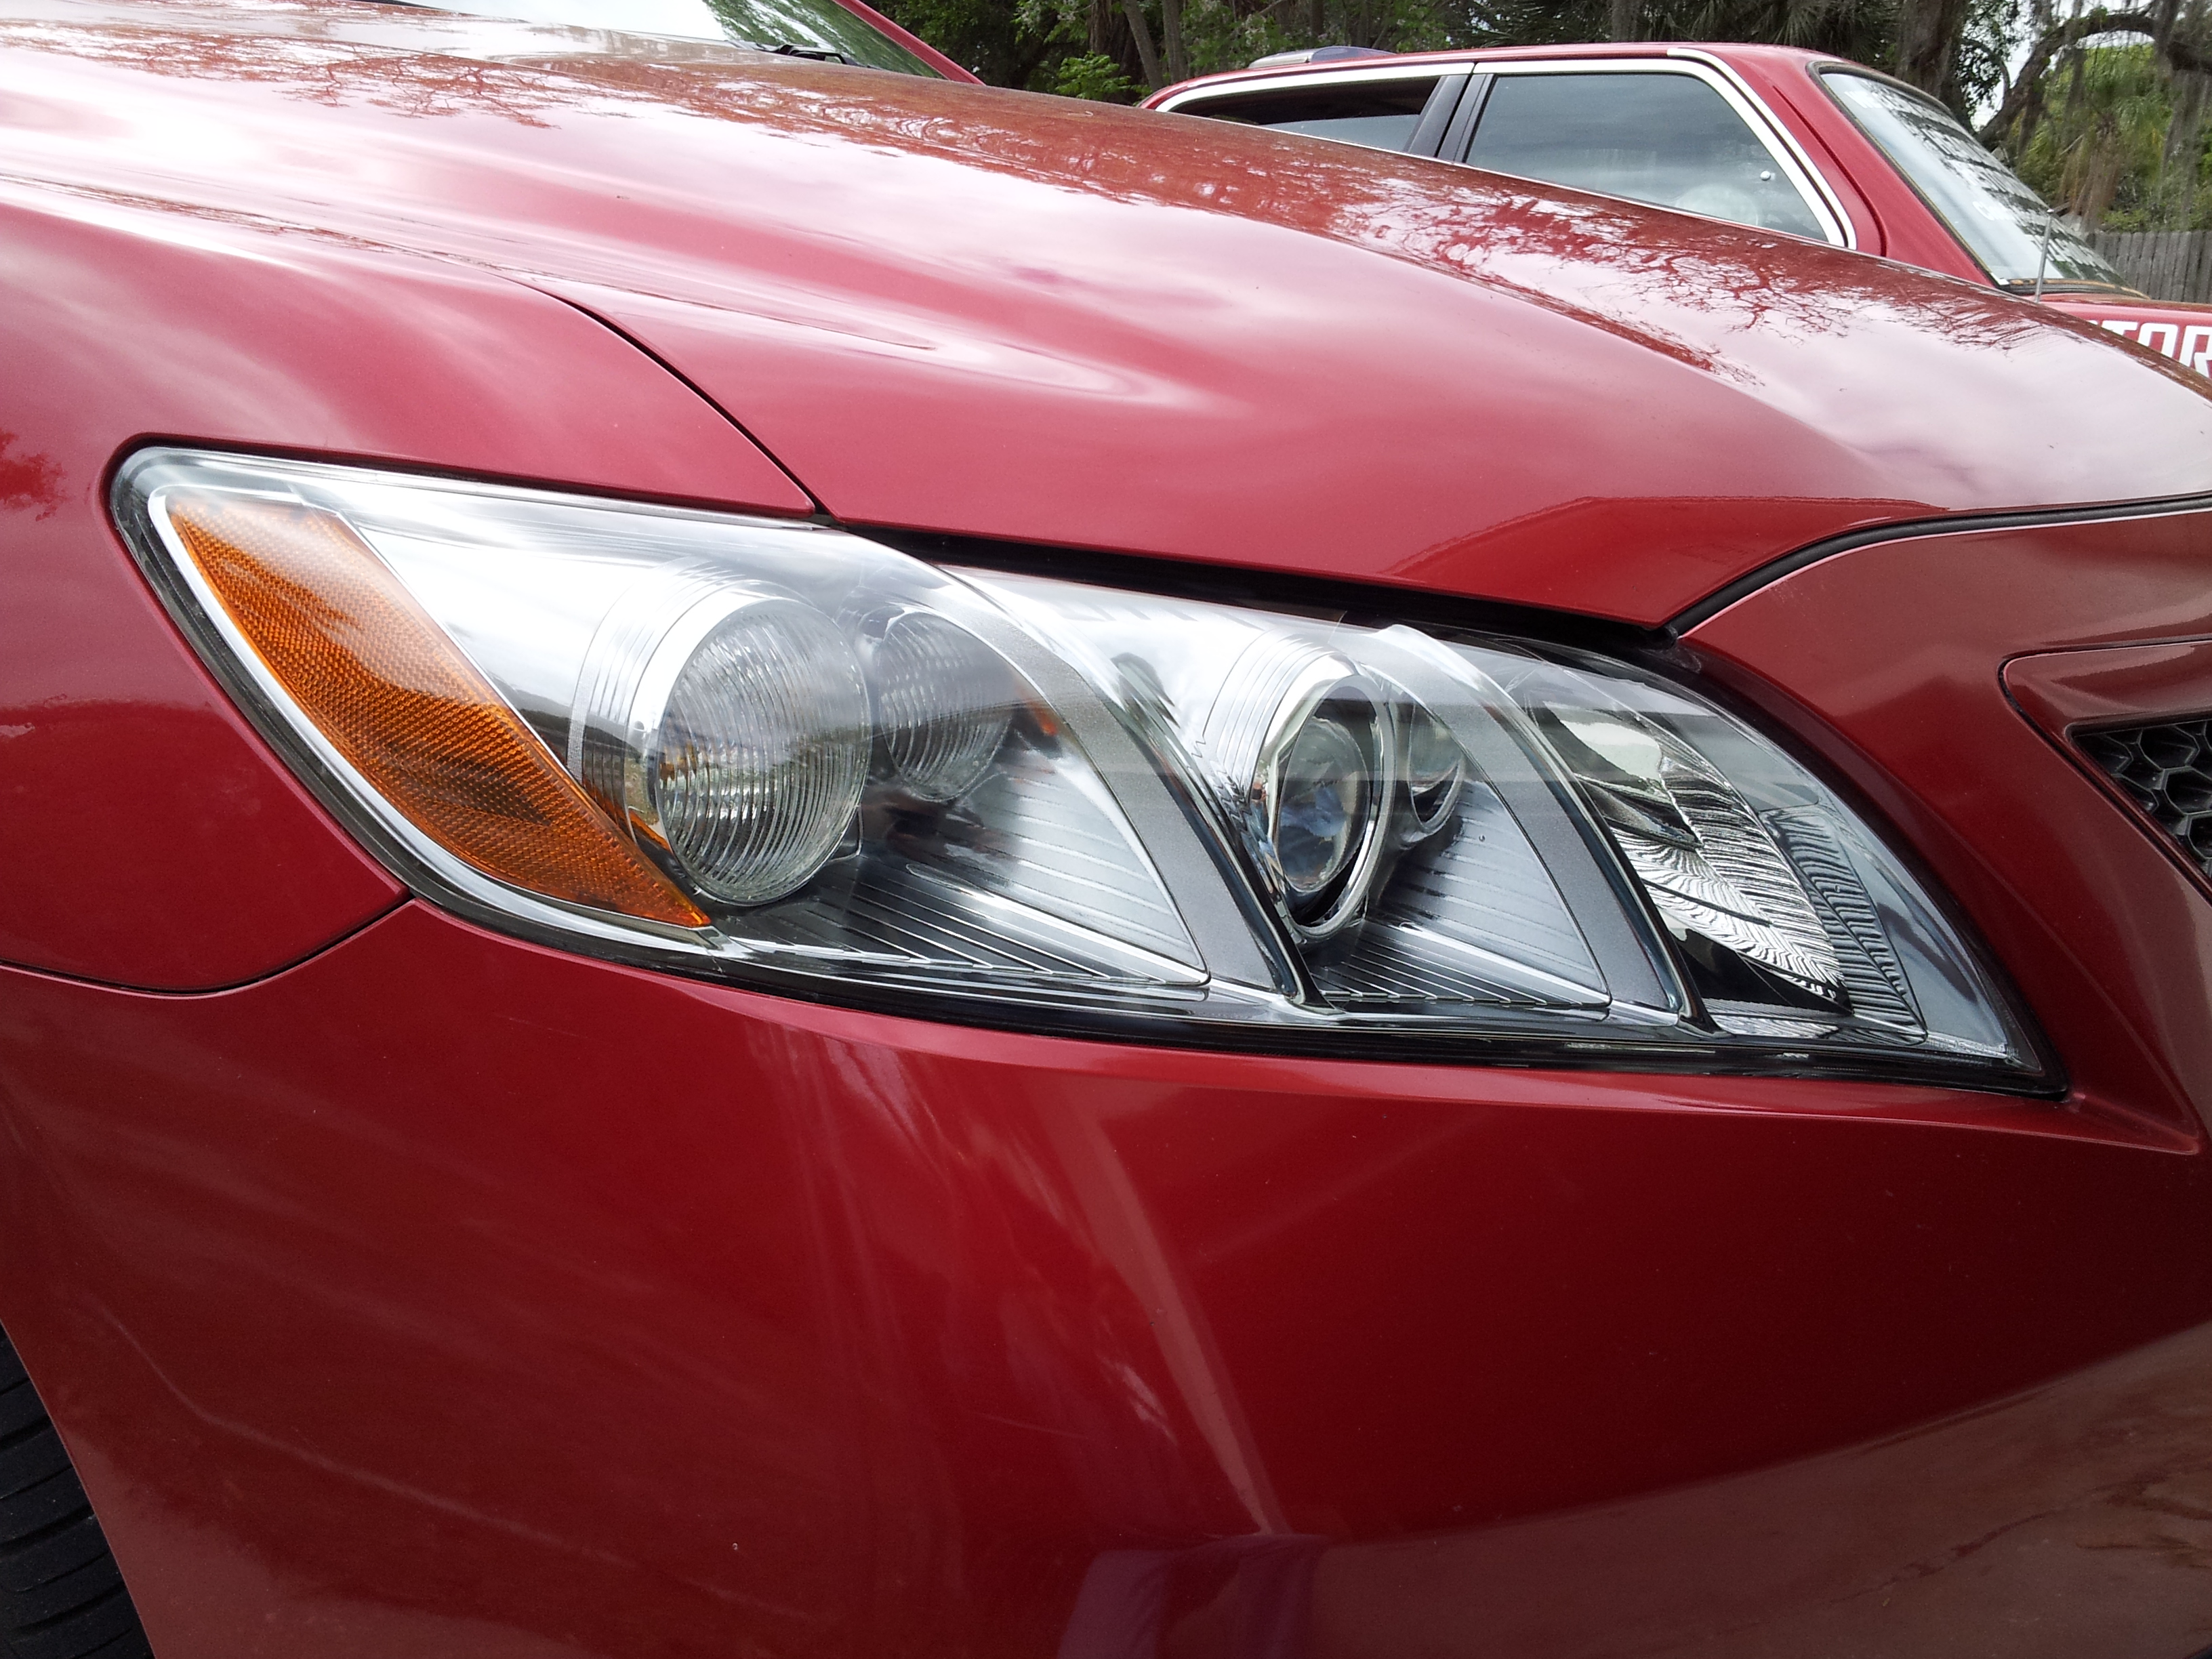 2007 Red Camry